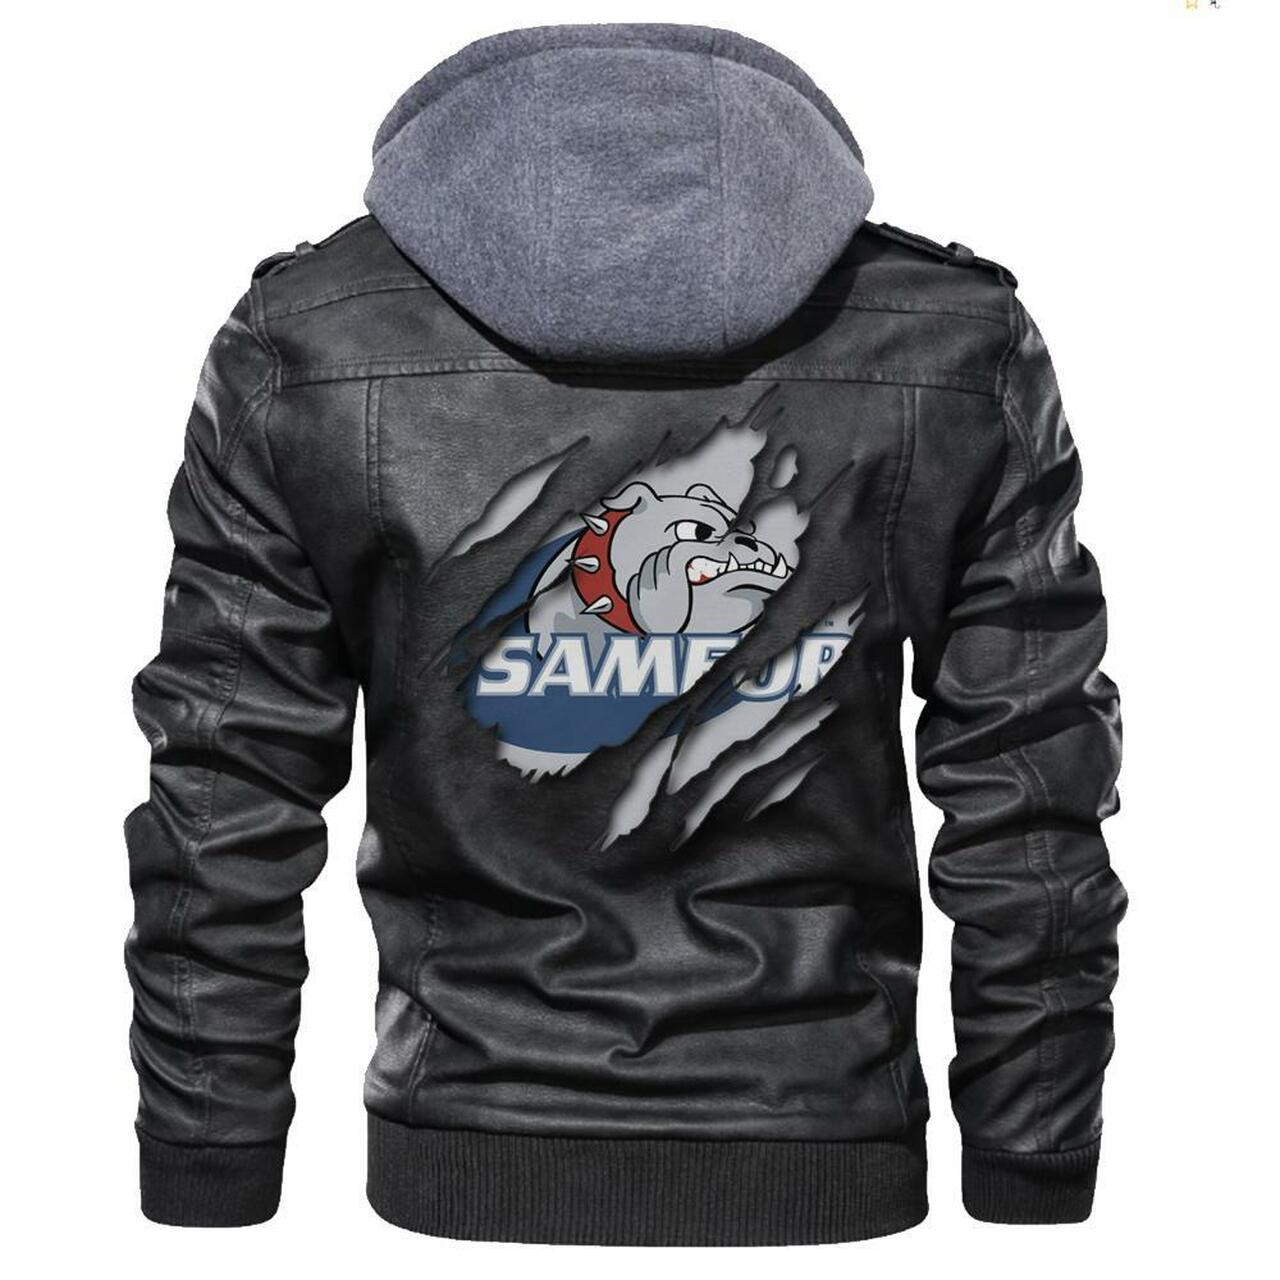 Don't wait another minute, Get Hot Leather Jacket today 125